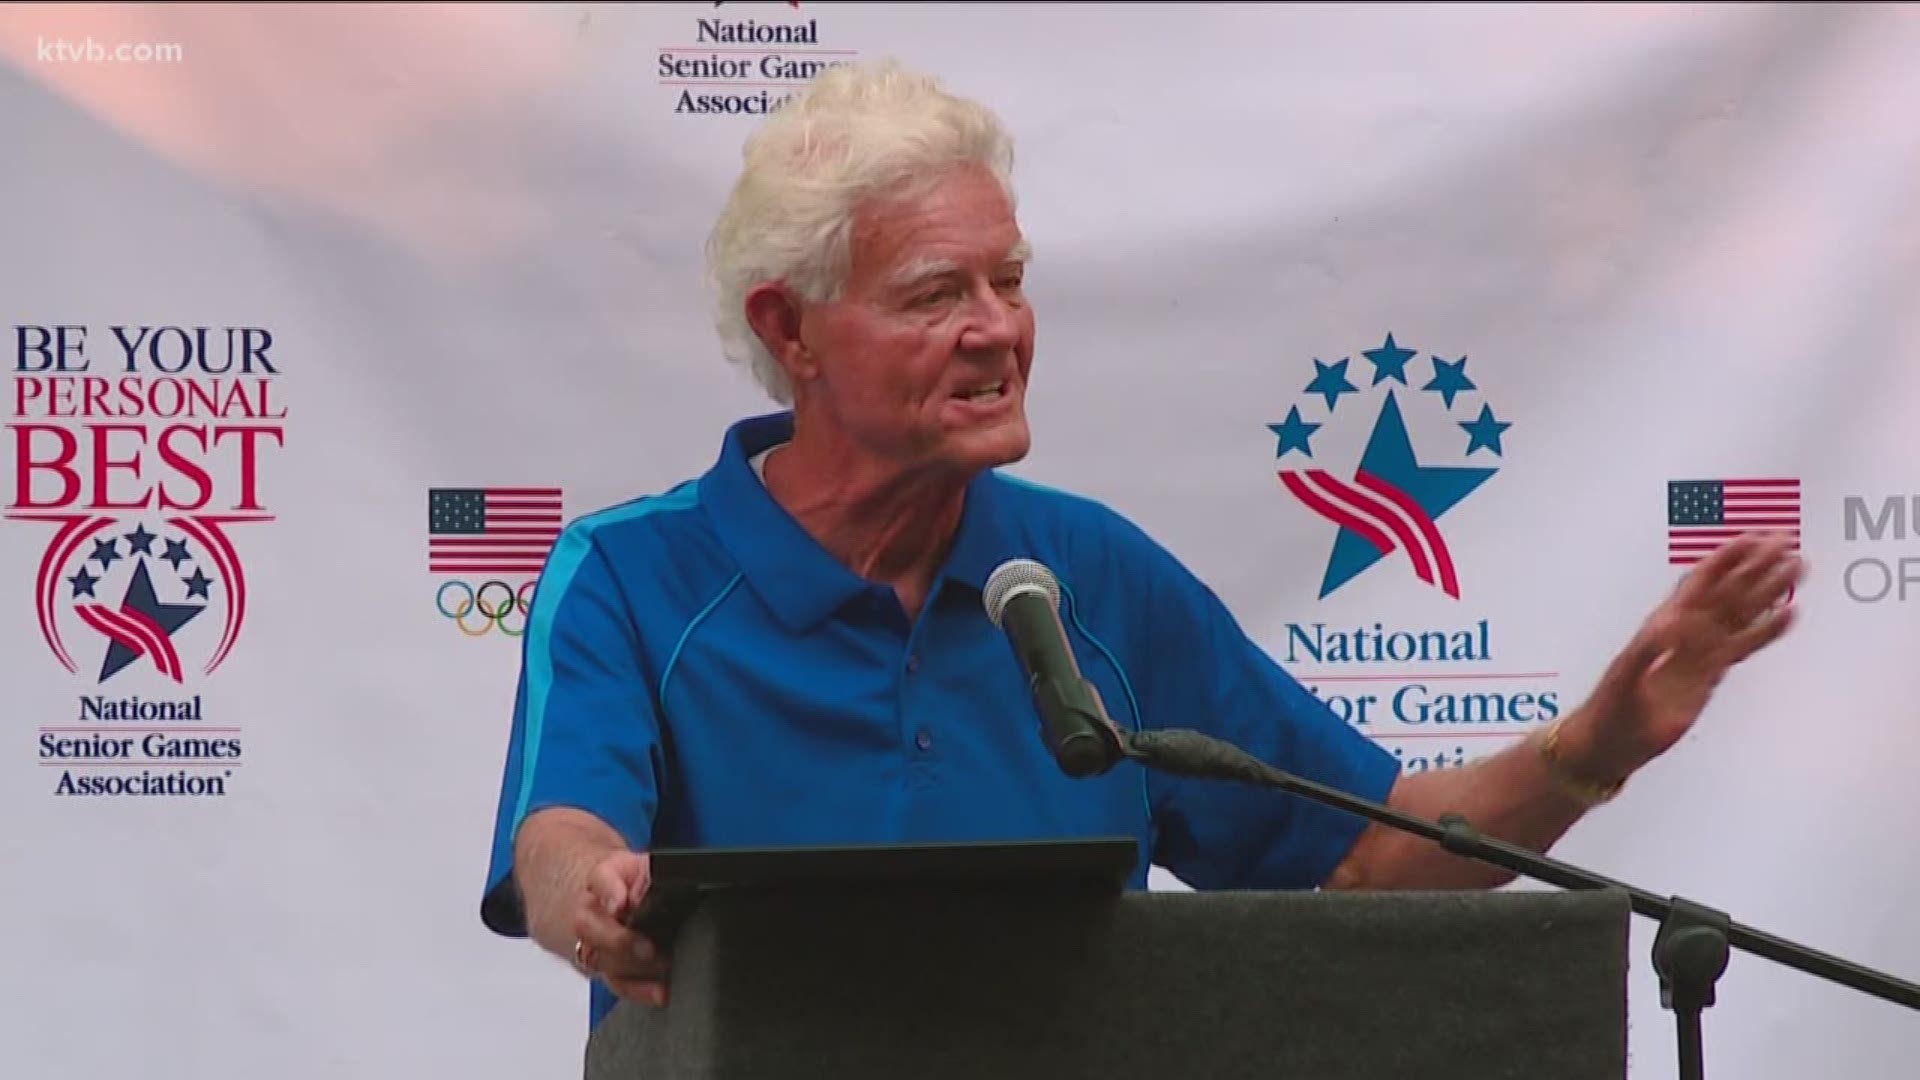 A 78-year-old Boise man was honored by the national Senior Games for his commitment to physical fitness and sportsmanship.